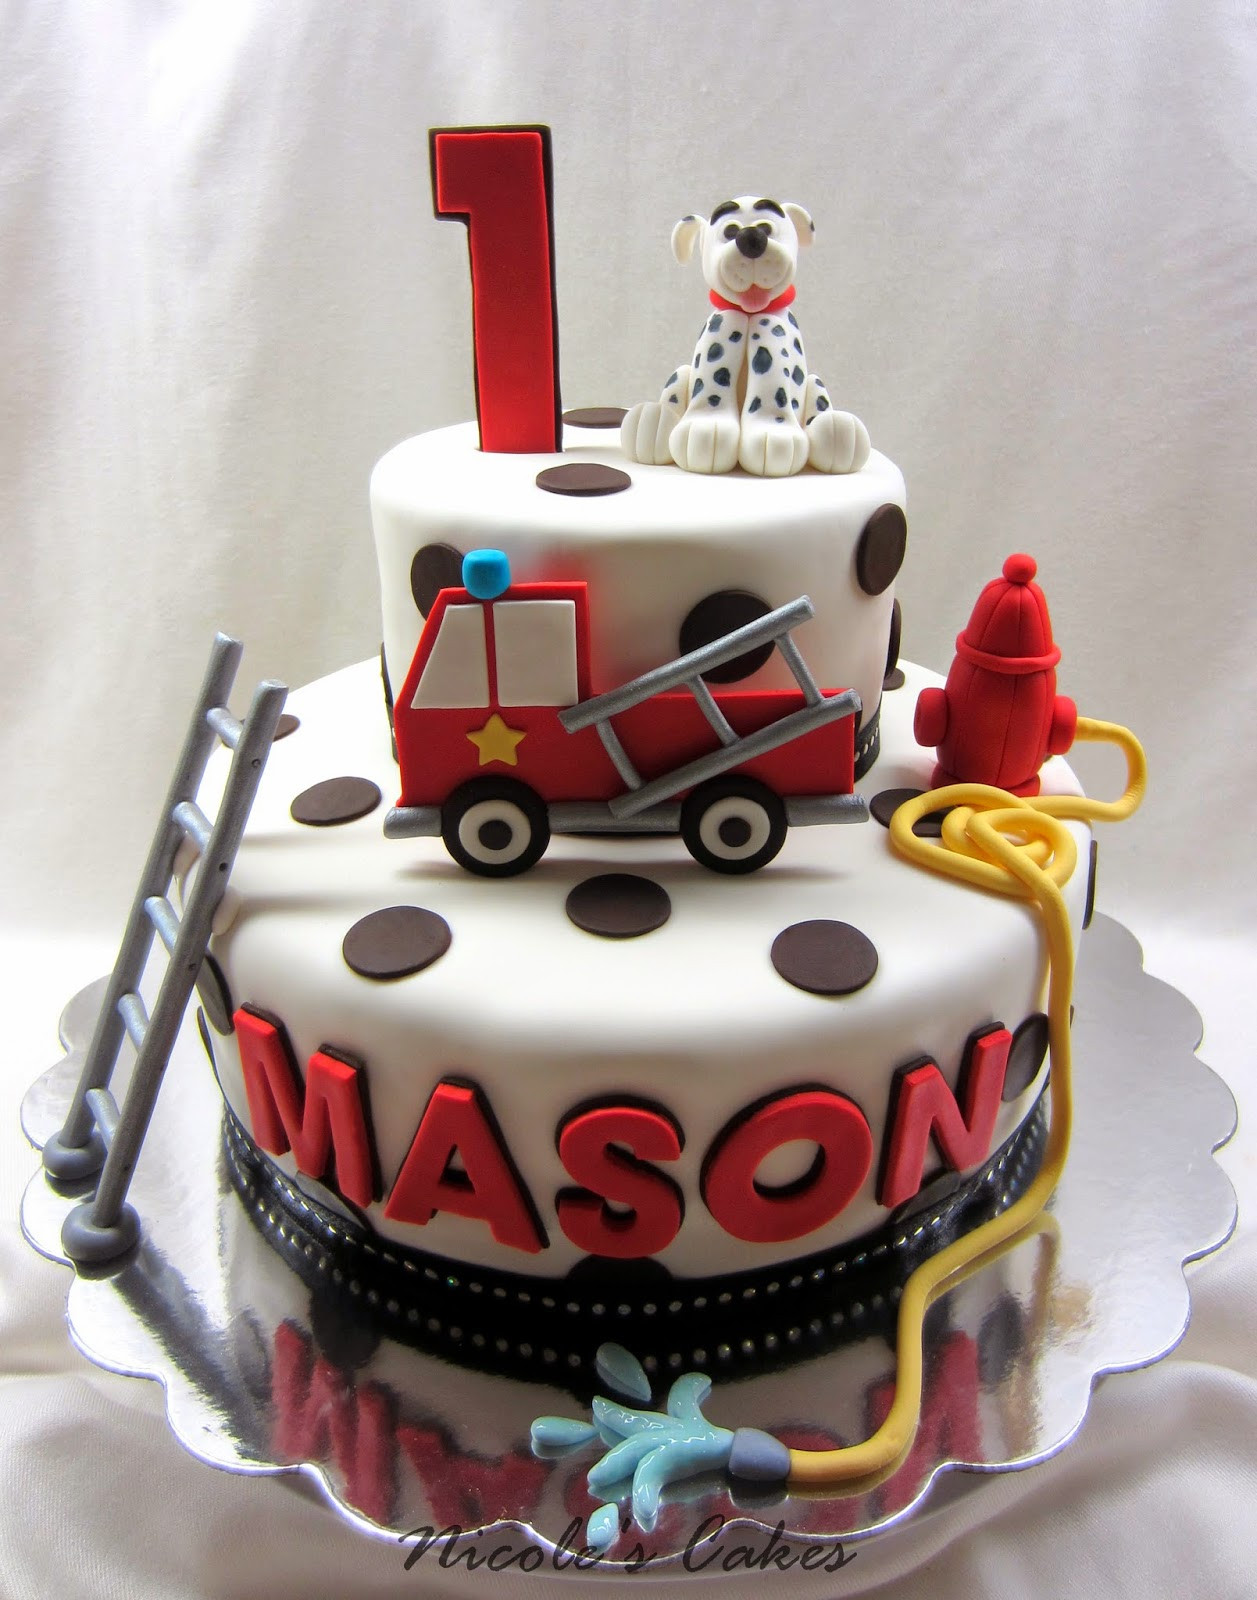 Firetruck Birthday Cake
 Confections Cakes & Creations Firetruck & Dalmation 1st